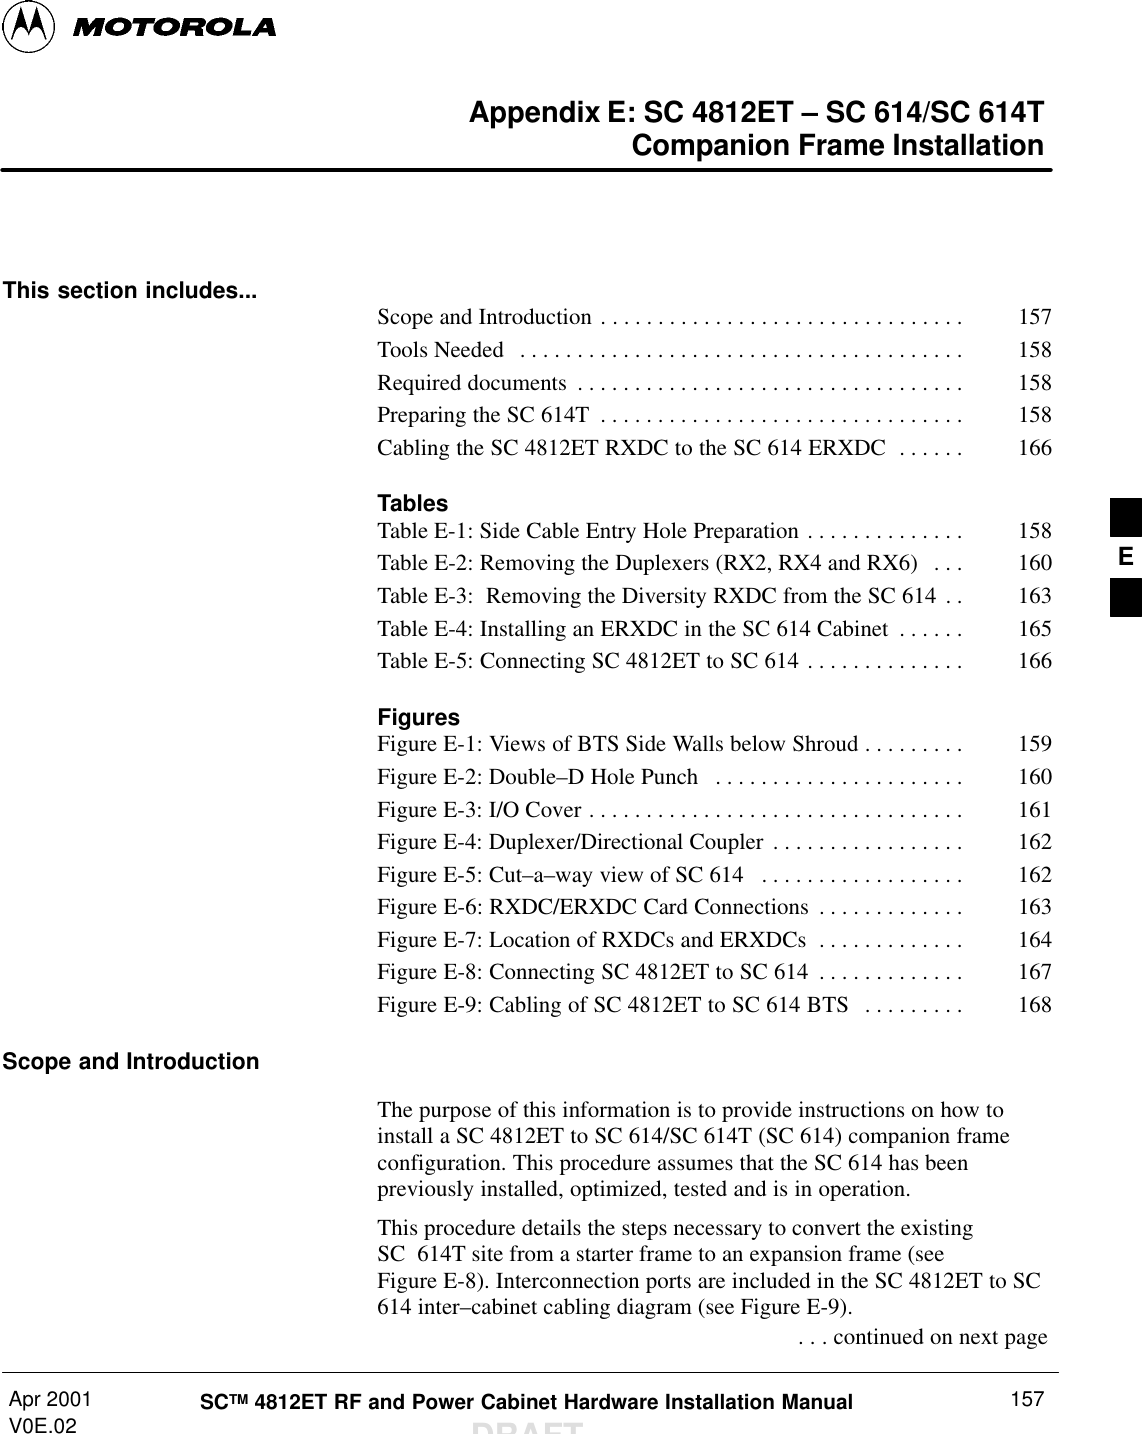 Apr 2001V0E.02 SCTM 4812ET RF and Power Cabinet Hardware Installation ManualDRAFT157Appendix E: SC 4812ET – SC 614/SC 614TCompanion Frame InstallationThis section includes... Scope and Introduction 157. . . . . . . . . . . . . . . . . . . . . . . . . . . . . . . . Tools Needed 158. . . . . . . . . . . . . . . . . . . . . . . . . . . . . . . . . . . . . . . Required documents 158. . . . . . . . . . . . . . . . . . . . . . . . . . . . . . . . . . Preparing the SC 614T 158. . . . . . . . . . . . . . . . . . . . . . . . . . . . . . . . Cabling the SC 4812ET RXDC to the SC 614 ERXDC 166. . . . . . TablesTable E-1: Side Cable Entry Hole Preparation 158. . . . . . . . . . . . . . Table E-2: Removing the Duplexers (RX2, RX4 and RX6)  160. . . Table E-3:  Removing the Diversity RXDC from the SC 614 163. . Table E-4: Installing an ERXDC in the SC 614 Cabinet 165. . . . . . Table E-5: Connecting SC 4812ET to SC 614 166. . . . . . . . . . . . . . FiguresFigure E-1: Views of BTS Side Walls below Shroud 159. . . . . . . . . Figure E-2: Double–D Hole Punch  160. . . . . . . . . . . . . . . . . . . . . . Figure E-3: I/O Cover 161. . . . . . . . . . . . . . . . . . . . . . . . . . . . . . . . . Figure E-4: Duplexer/Directional Coupler 162. . . . . . . . . . . . . . . . . Figure E-5: Cut–a–way view of SC 614  162. . . . . . . . . . . . . . . . . . Figure E-6: RXDC/ERXDC Card Connections 163. . . . . . . . . . . . . Figure E-7: Location of RXDCs and ERXDCs 164. . . . . . . . . . . . . Figure E-8: Connecting SC 4812ET to SC 614 167. . . . . . . . . . . . . Figure E-9: Cabling of SC 4812ET to SC 614 BTS 168. . . . . . . . . Scope and IntroductionThe purpose of this information is to provide instructions on how toinstall a SC 4812ET to SC 614/SC 614T (SC 614) companion frameconfiguration. This procedure assumes that the SC 614 has beenpreviously installed, optimized, tested and is in operation.This procedure details the steps necessary to convert the existingSC 614T site from a starter frame to an expansion frame (seeFigure E-8). Interconnection ports are included in the SC 4812ET to SC614 inter–cabinet cabling diagram (see Figure E-9). . . . continued on next pageE